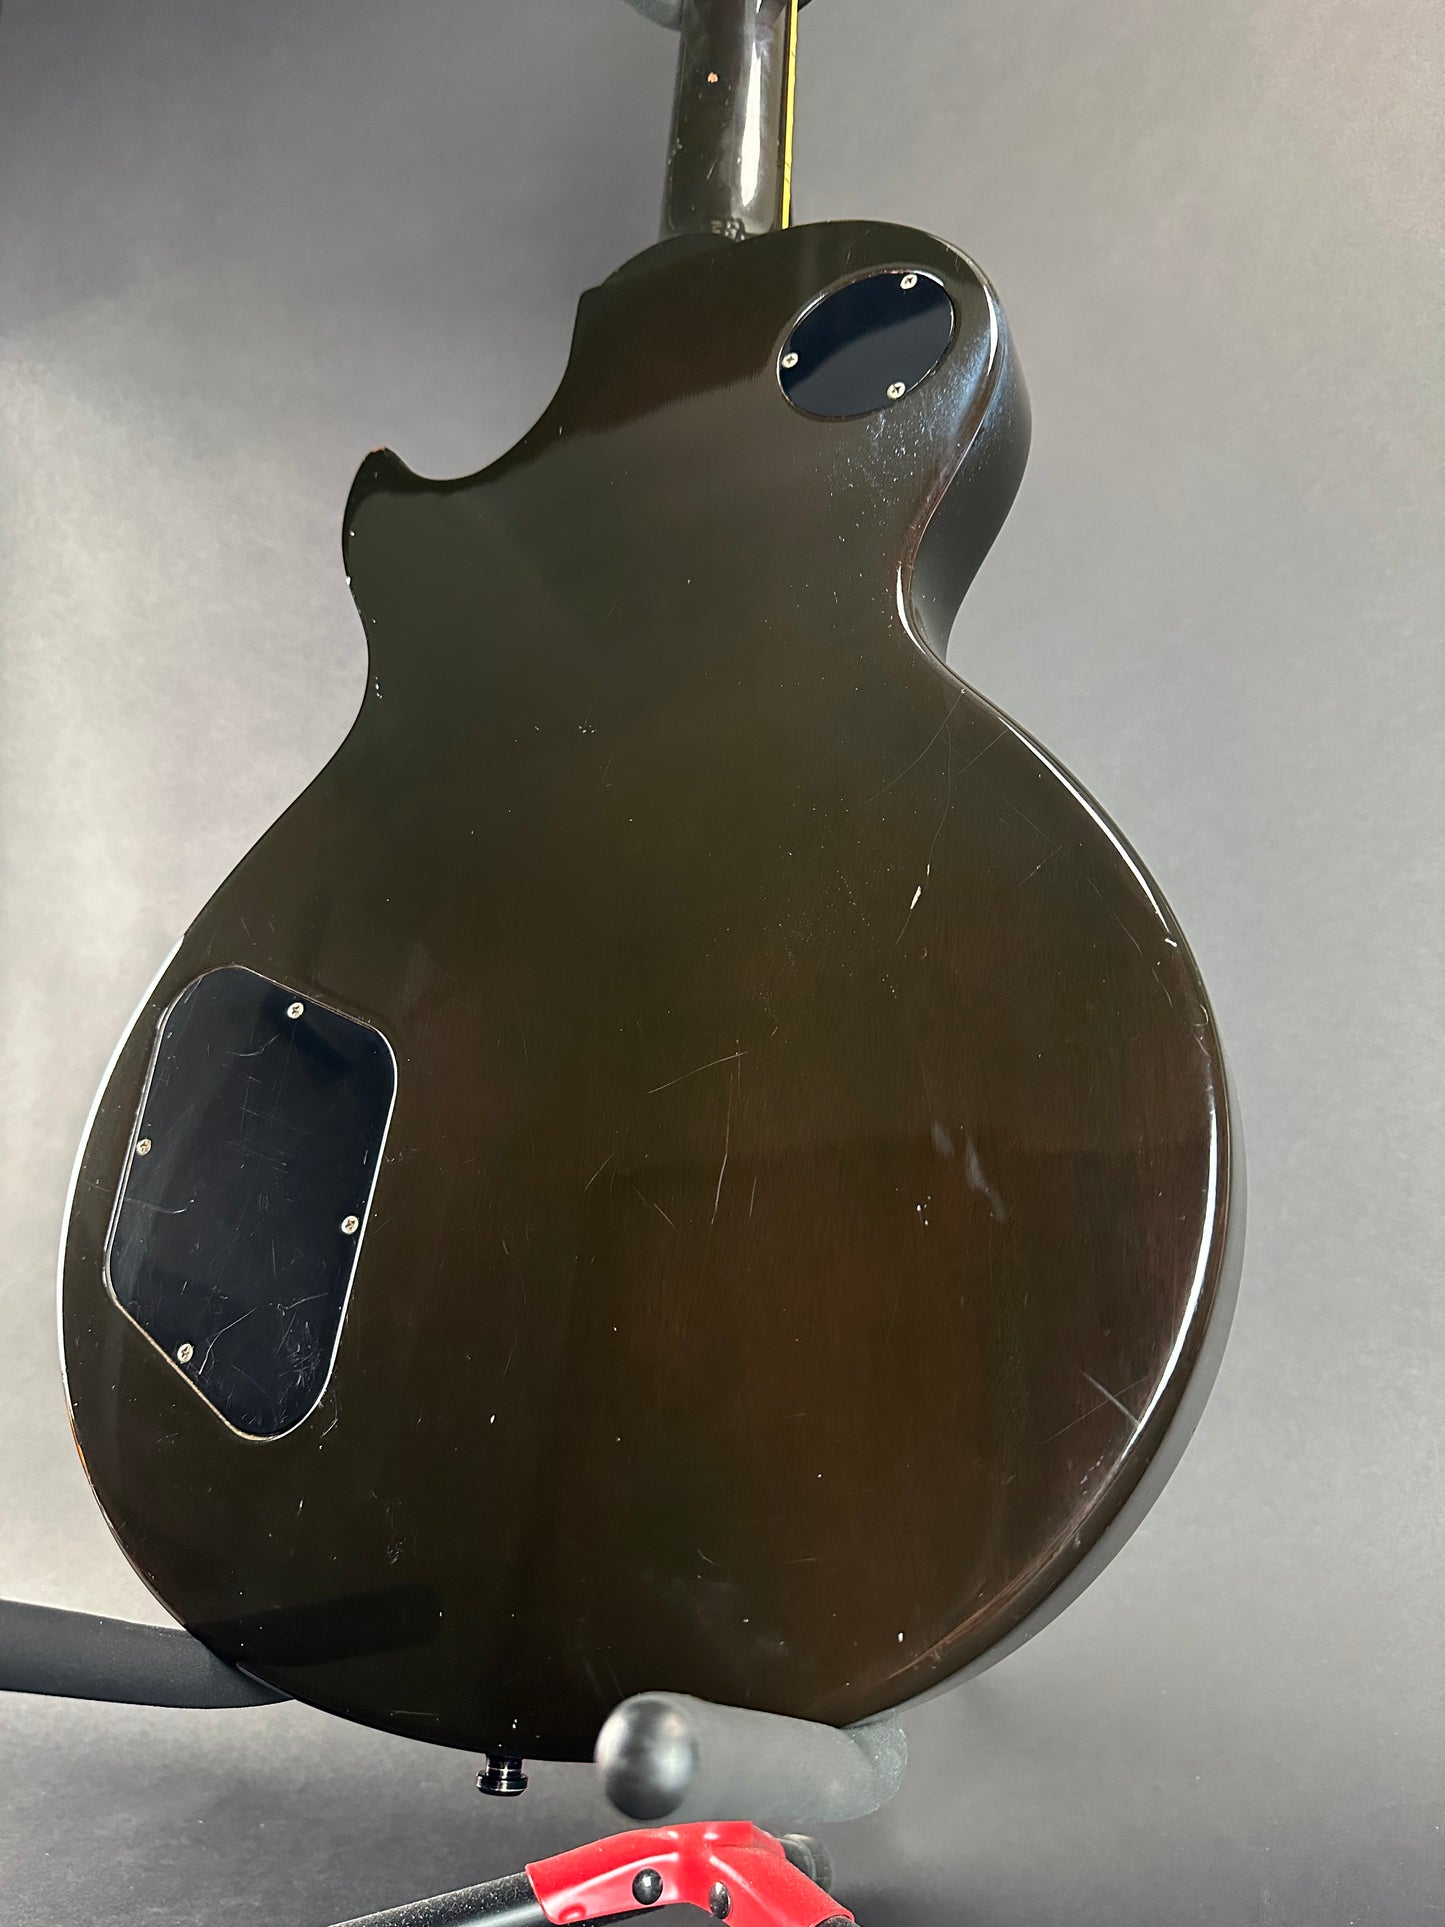 Back angle of Used 1989 Gibson Les Paul Special Burst.